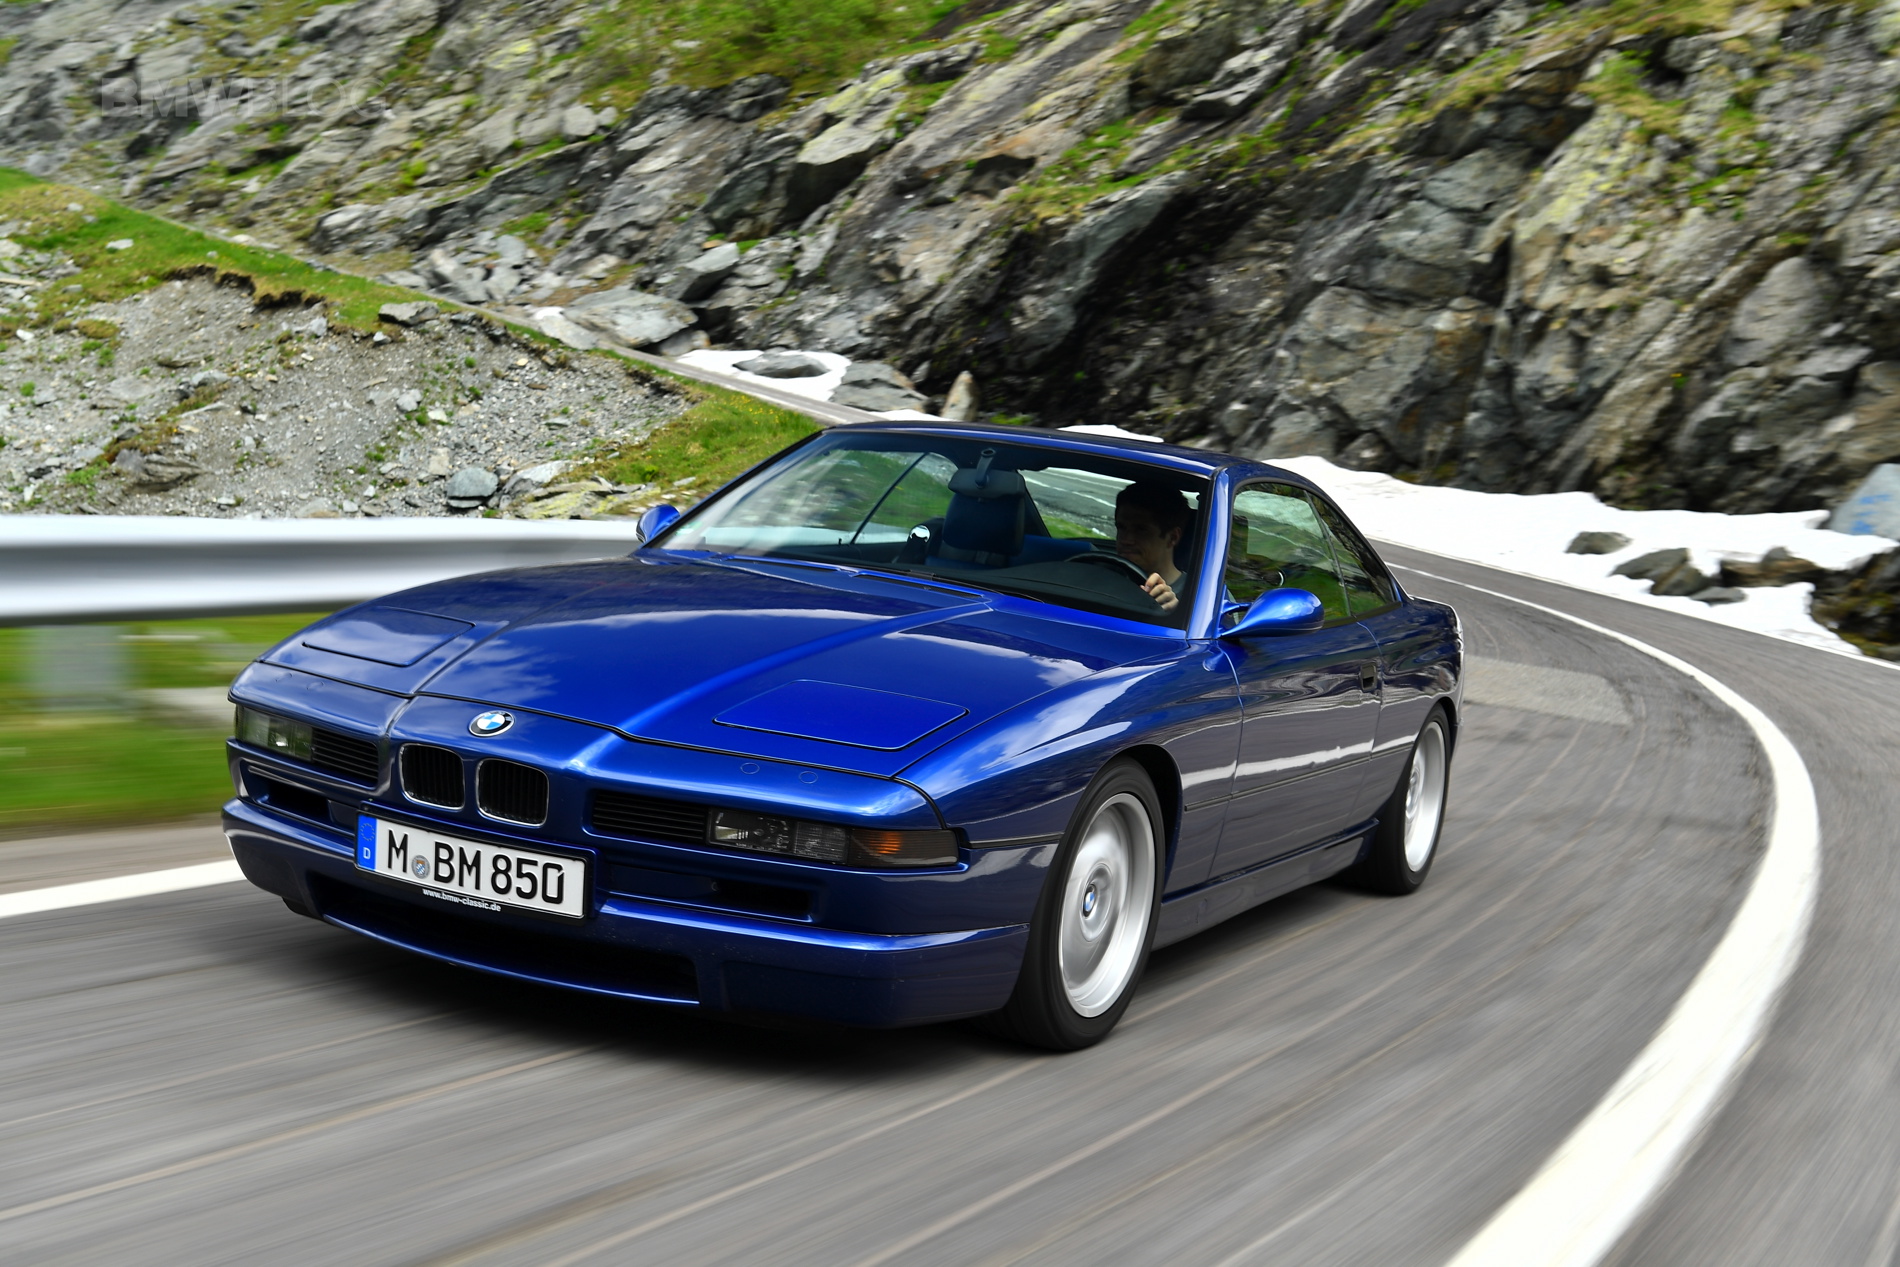 How Did the E31 BMW 850i Stack Up Against the Porsche 928 GTS?